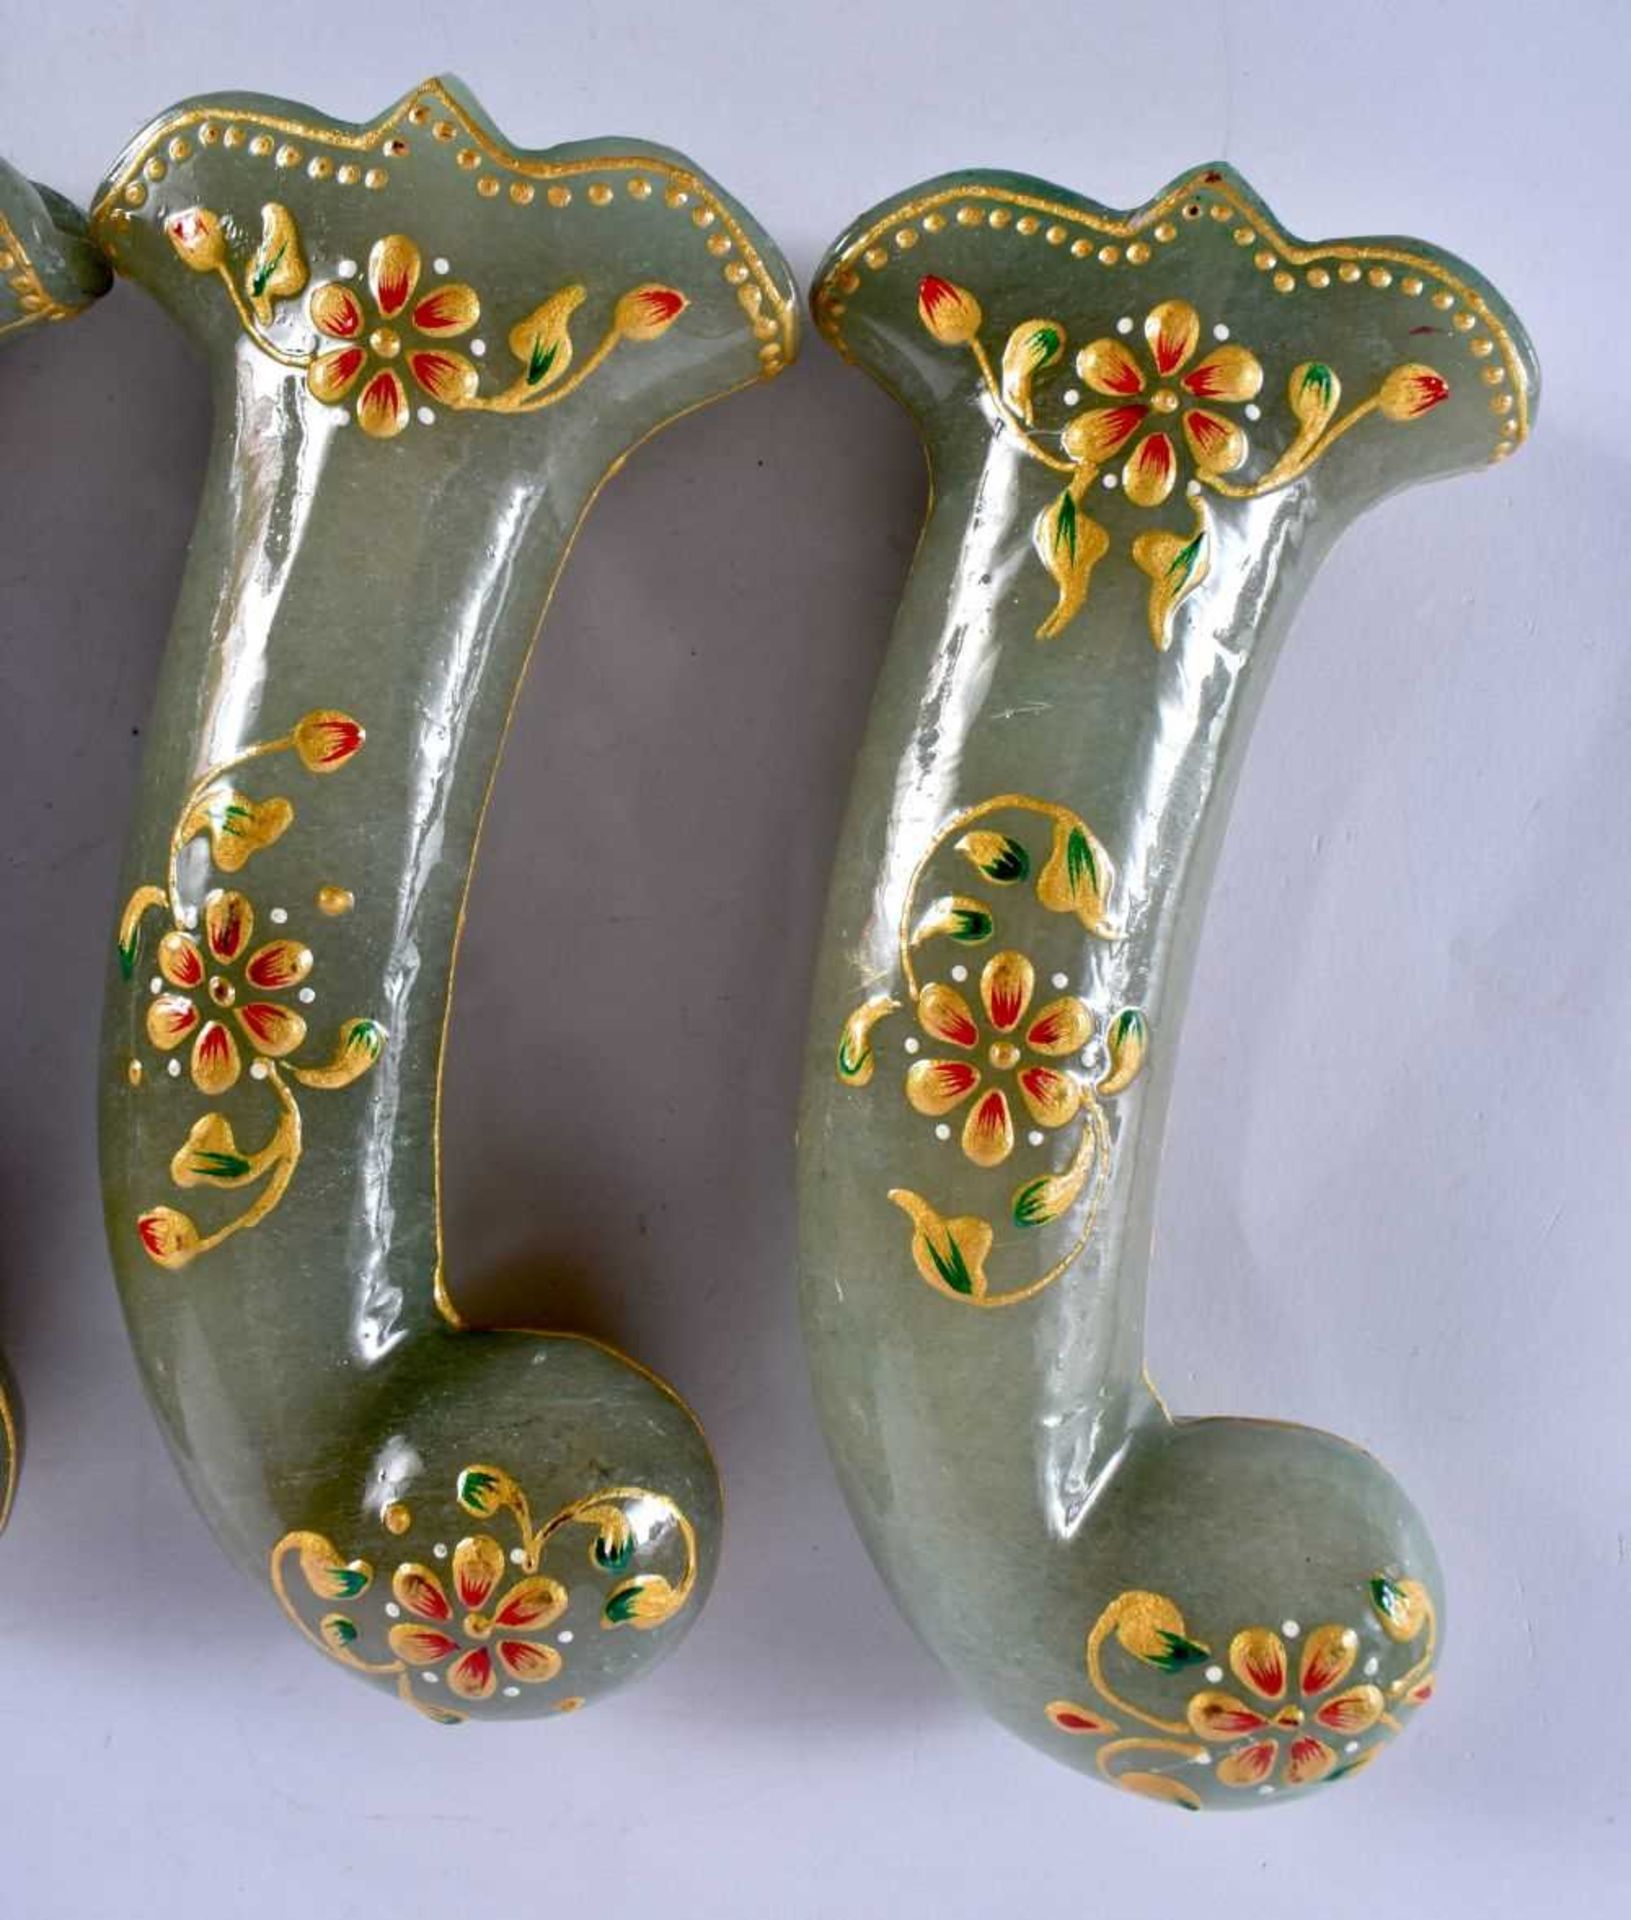 A SET OF FIVE MIDDLE EASTERN QAJAR LACQUER HARDSTONE DAGGER HANDLES overlaid with foliage and vines. - Image 2 of 6